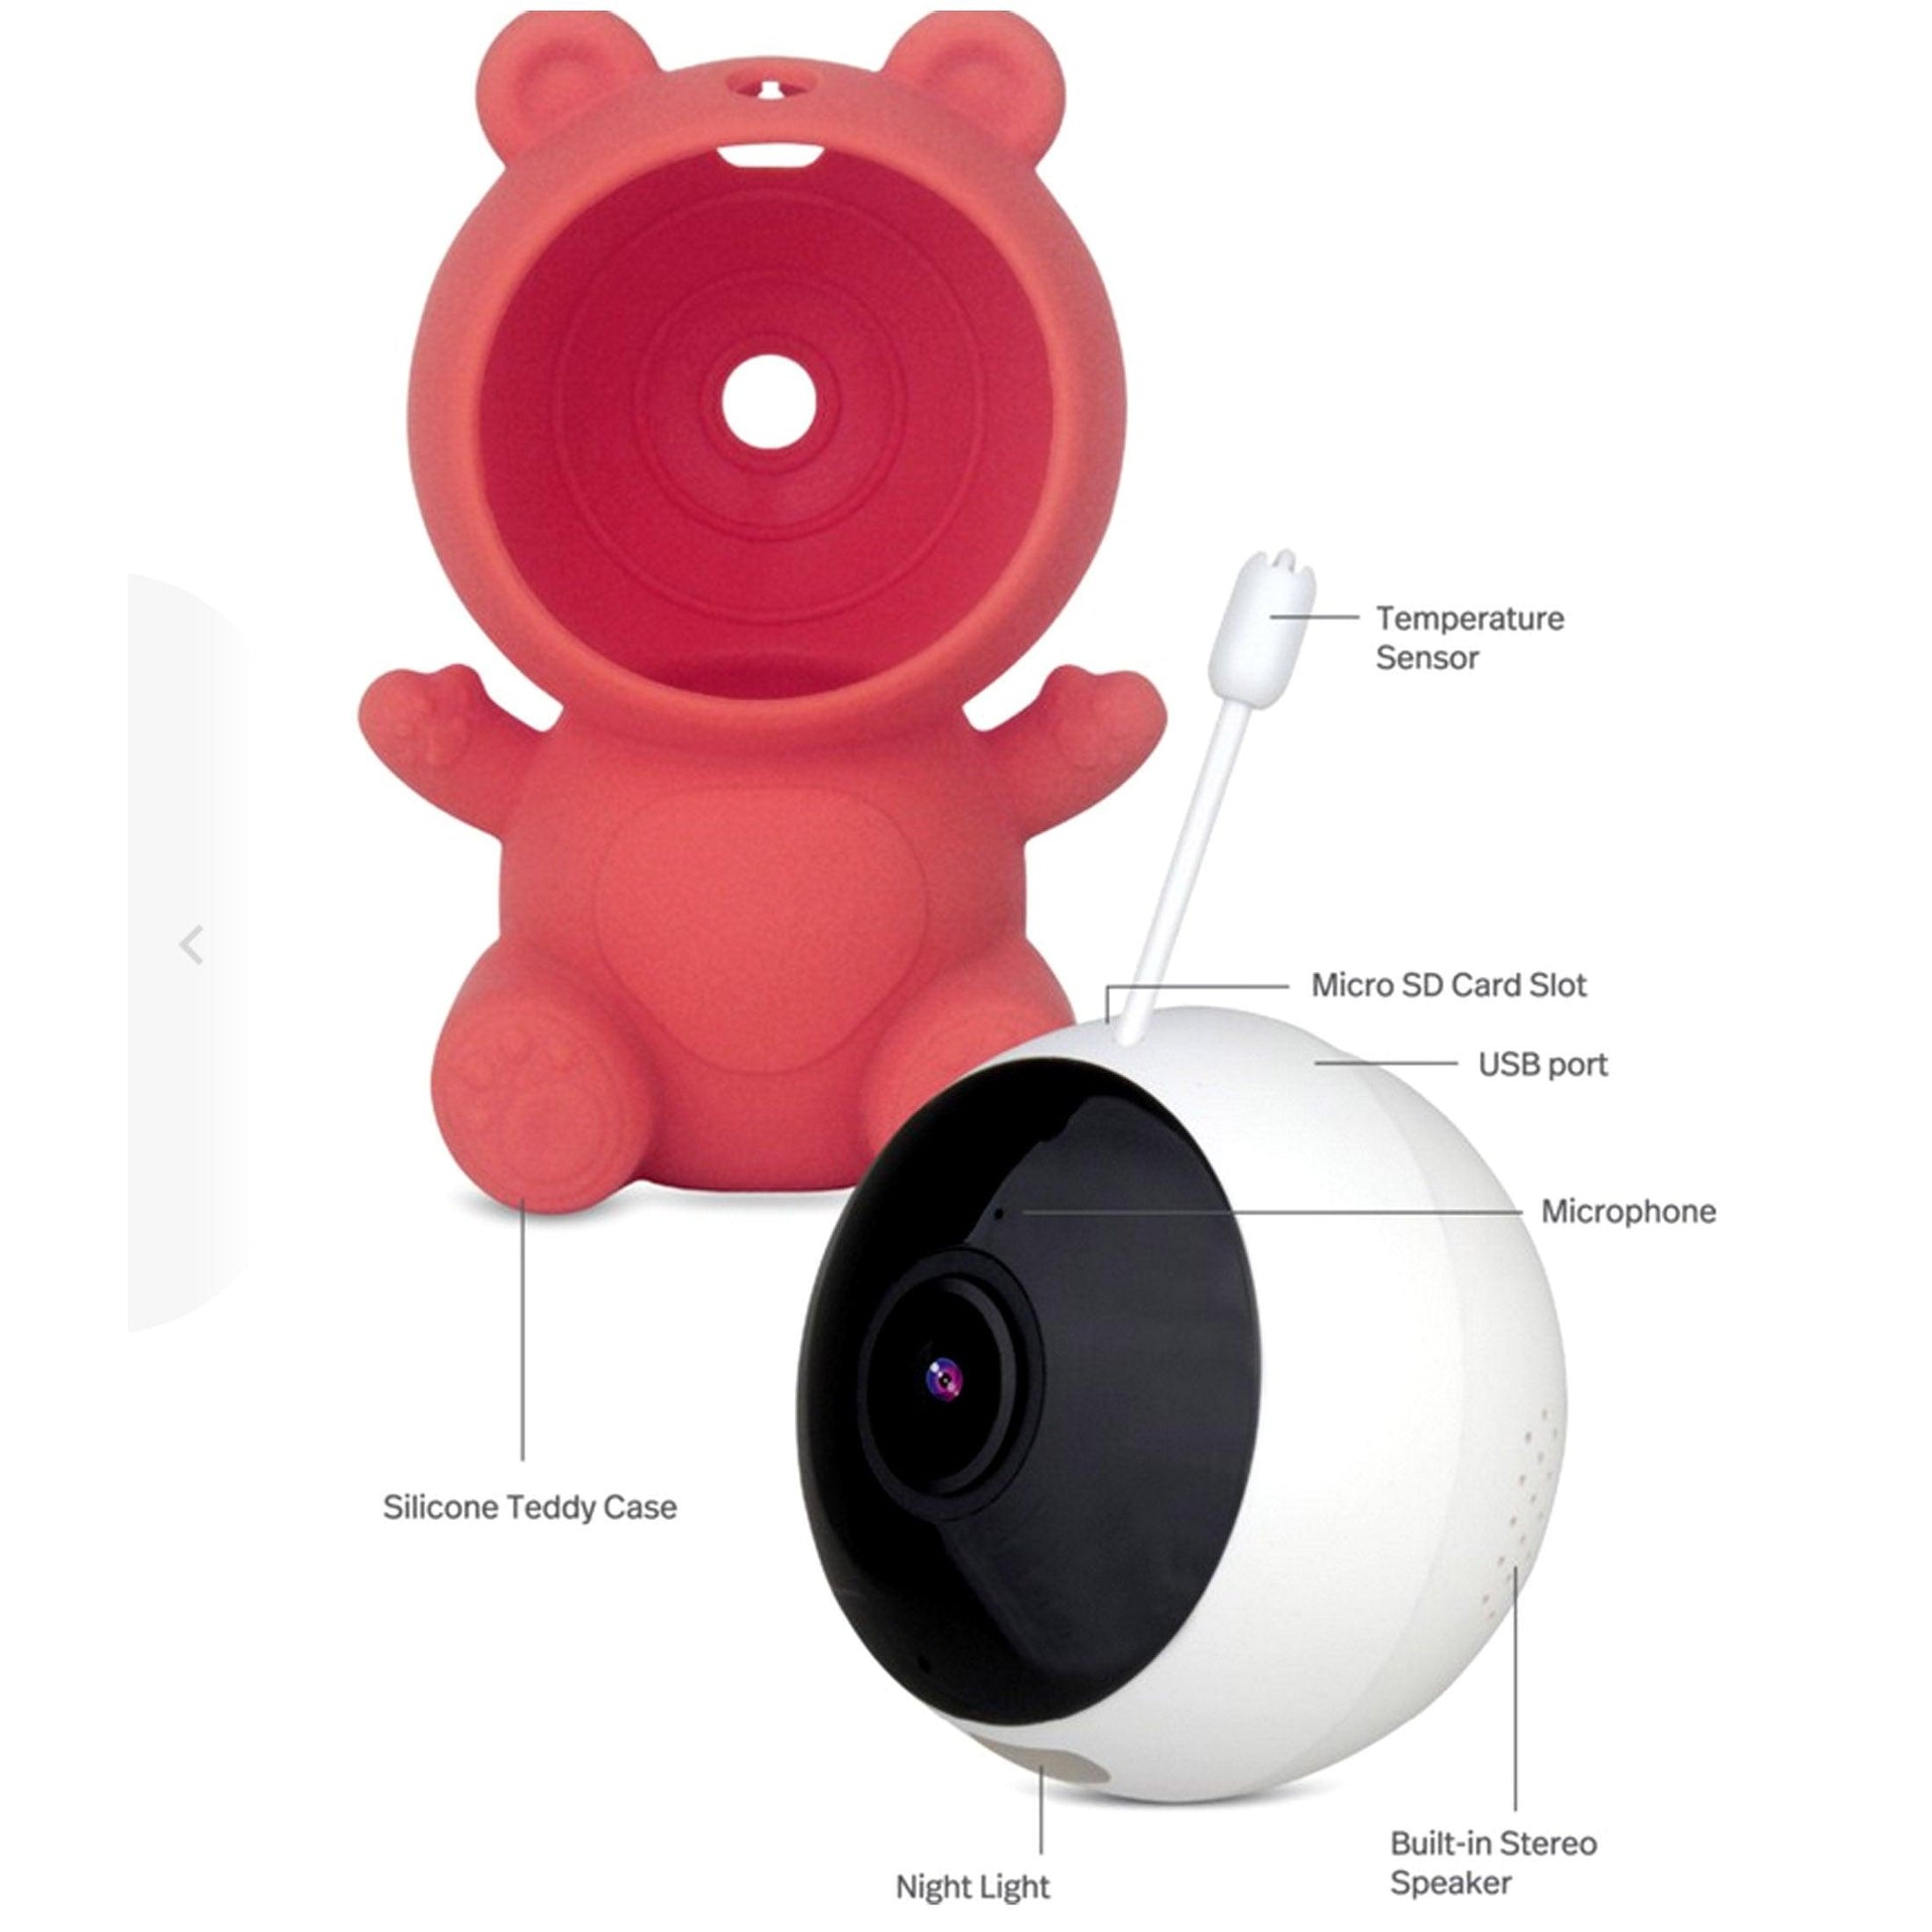 New DGTEC Teddy Smart Full HD Baby Monitor Pink iOS Android App